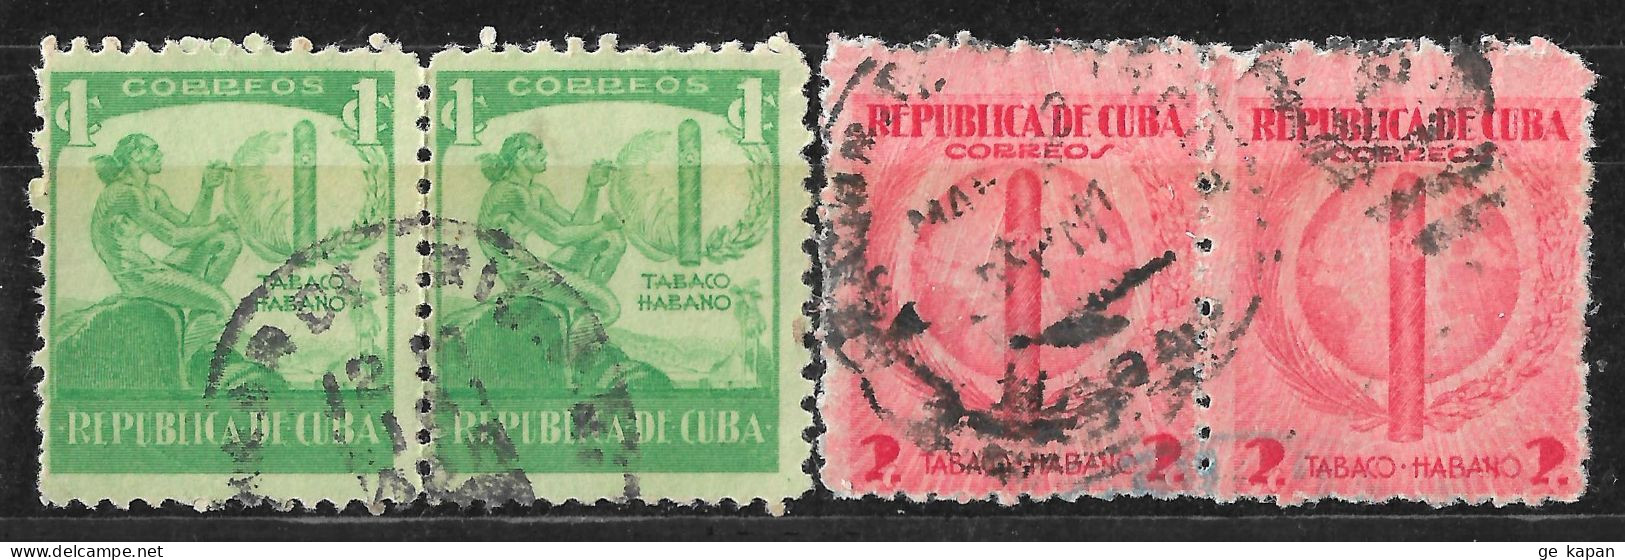 1939 CUBA SET OF 2 USED HORIZONTAL PAIR (Michel # 158,159) - Used Stamps